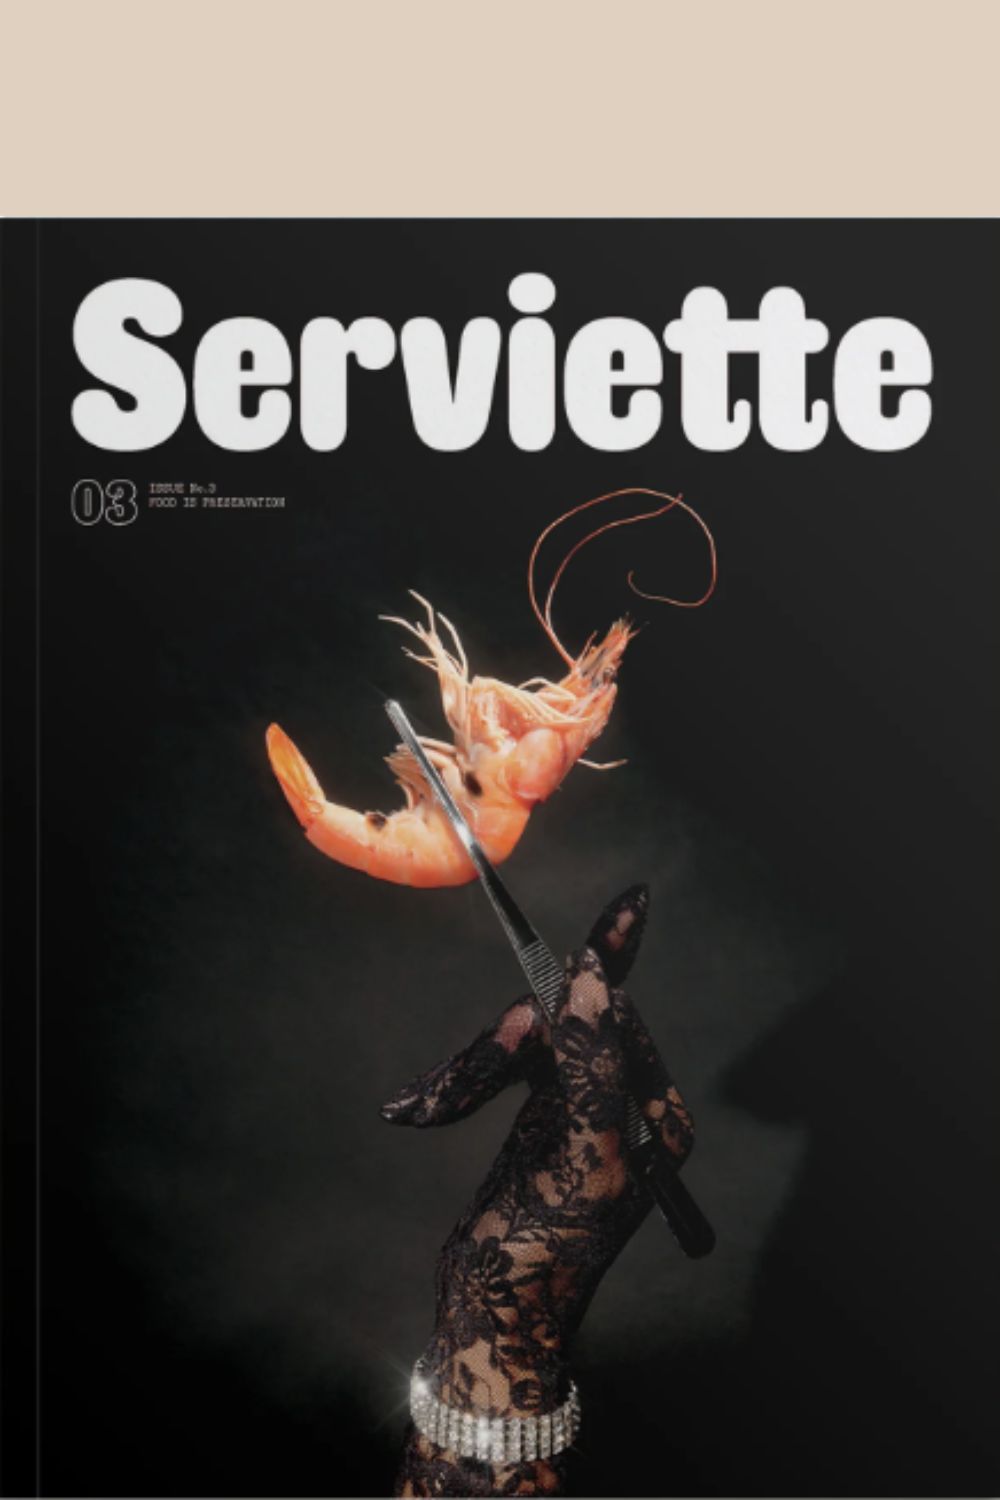 Serviette Magazine Issue 3 cover with a black laced glove hand holding a shrimp in a pair of tweezers